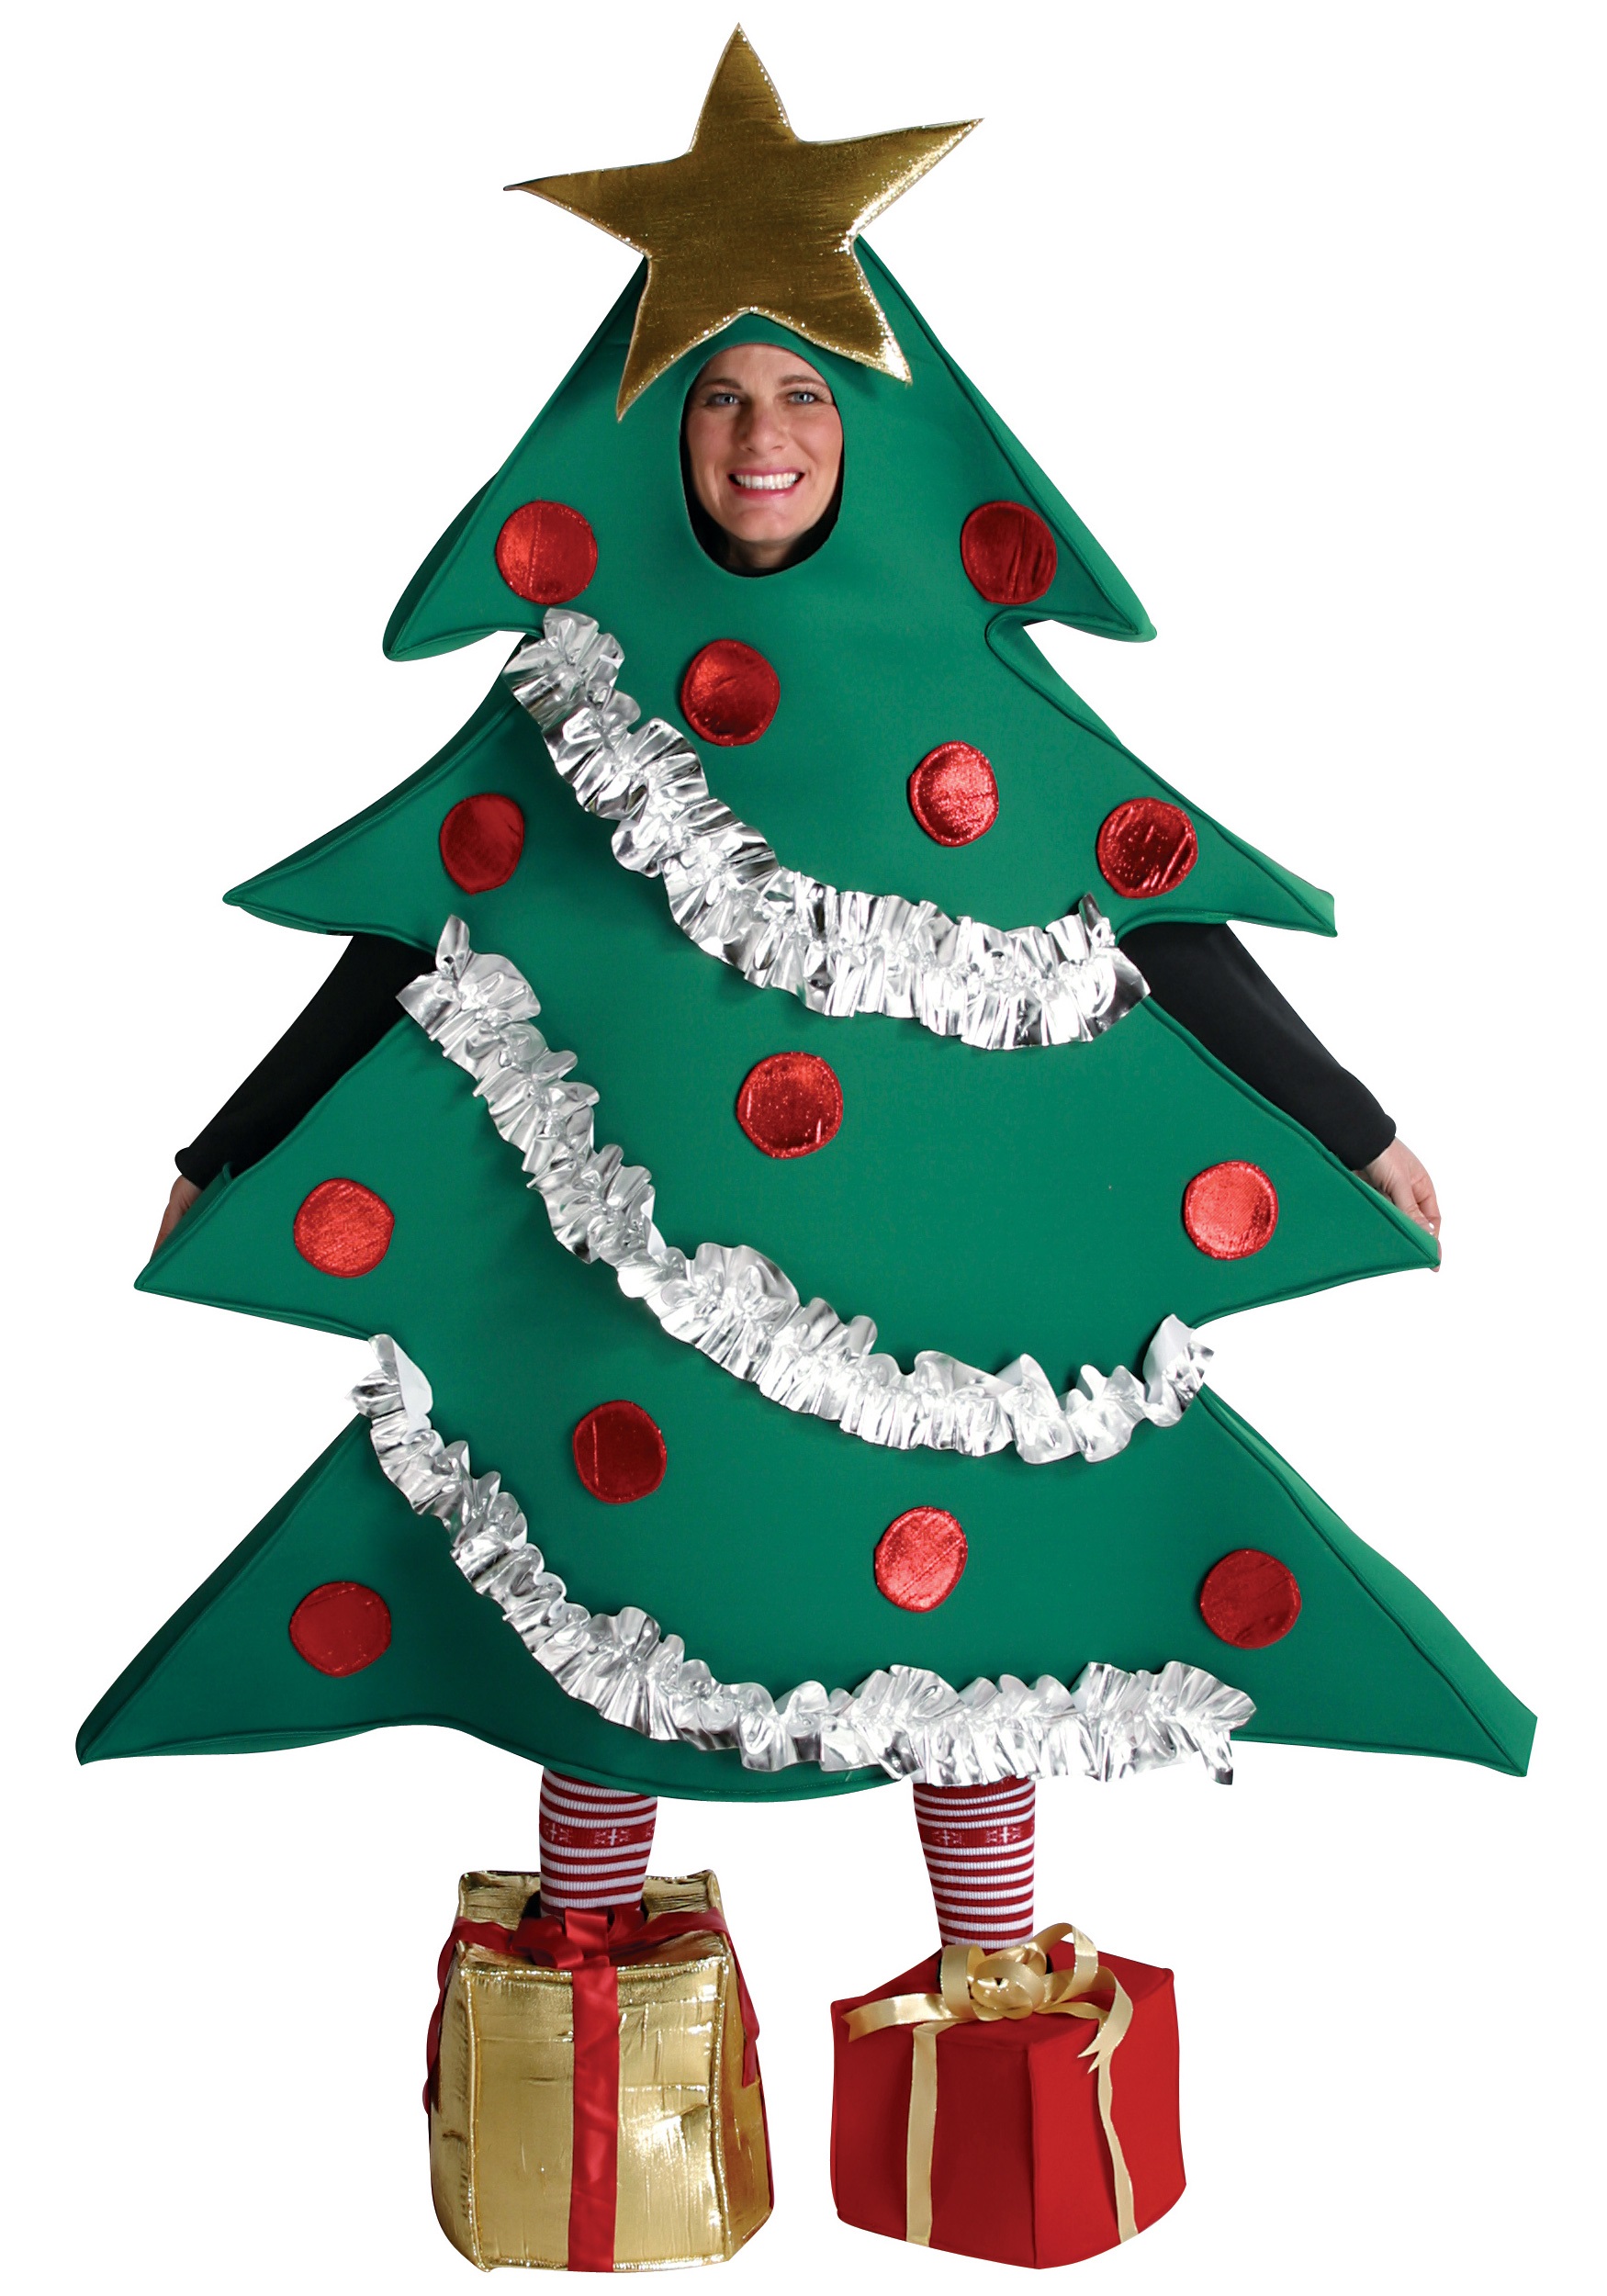 CK1352 Child Christmas Tree Funny Costume Christmas Novelty Fancy Dress Outfit